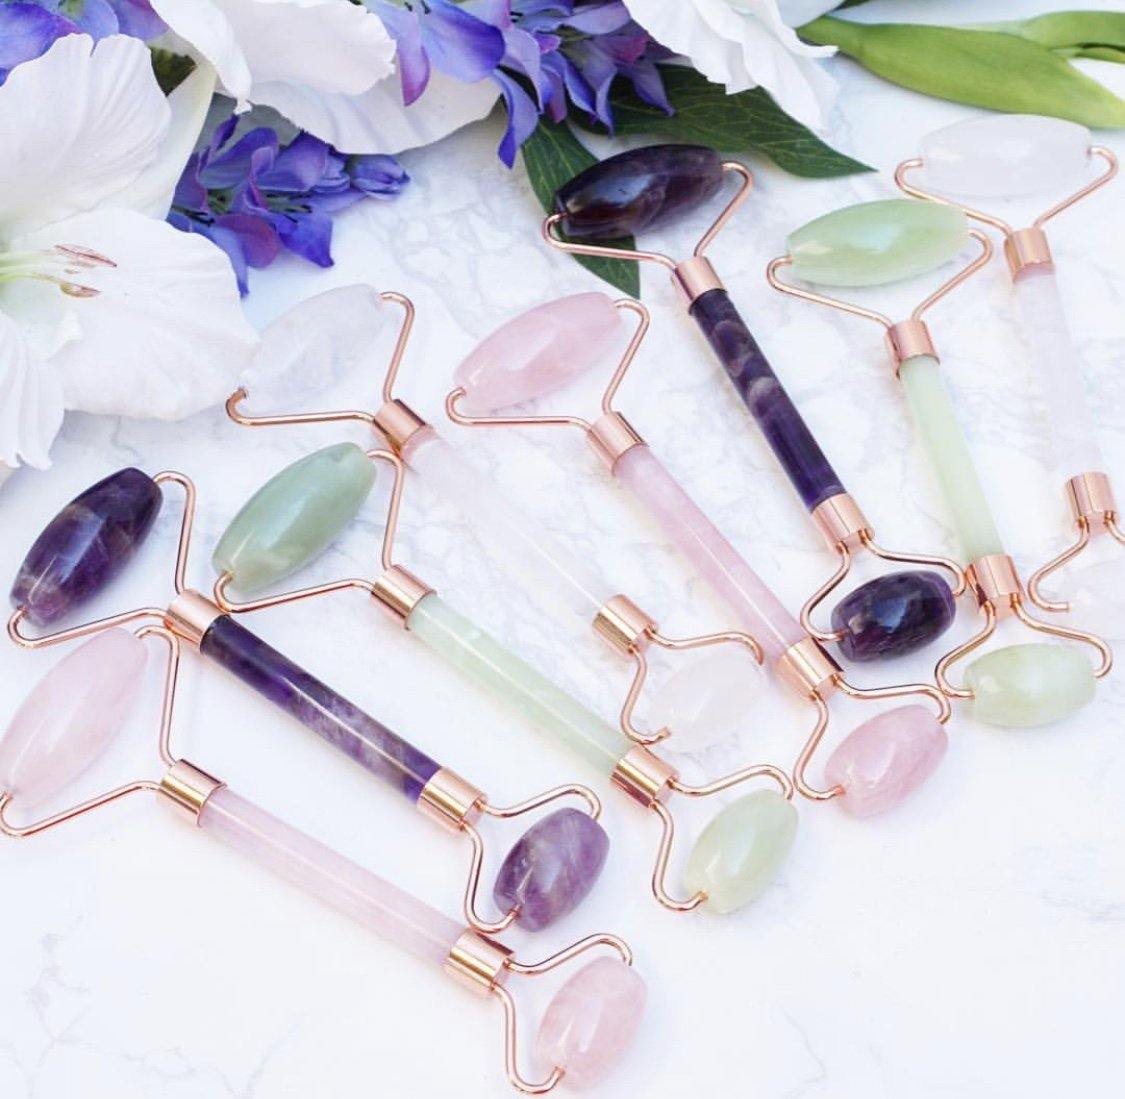 Crystal Face Rollers in Jade, Rose Quartz, Chevron Amethyst, Quartz, Obsidian and Tiger Eye. With rose gold colored metal accenting. 